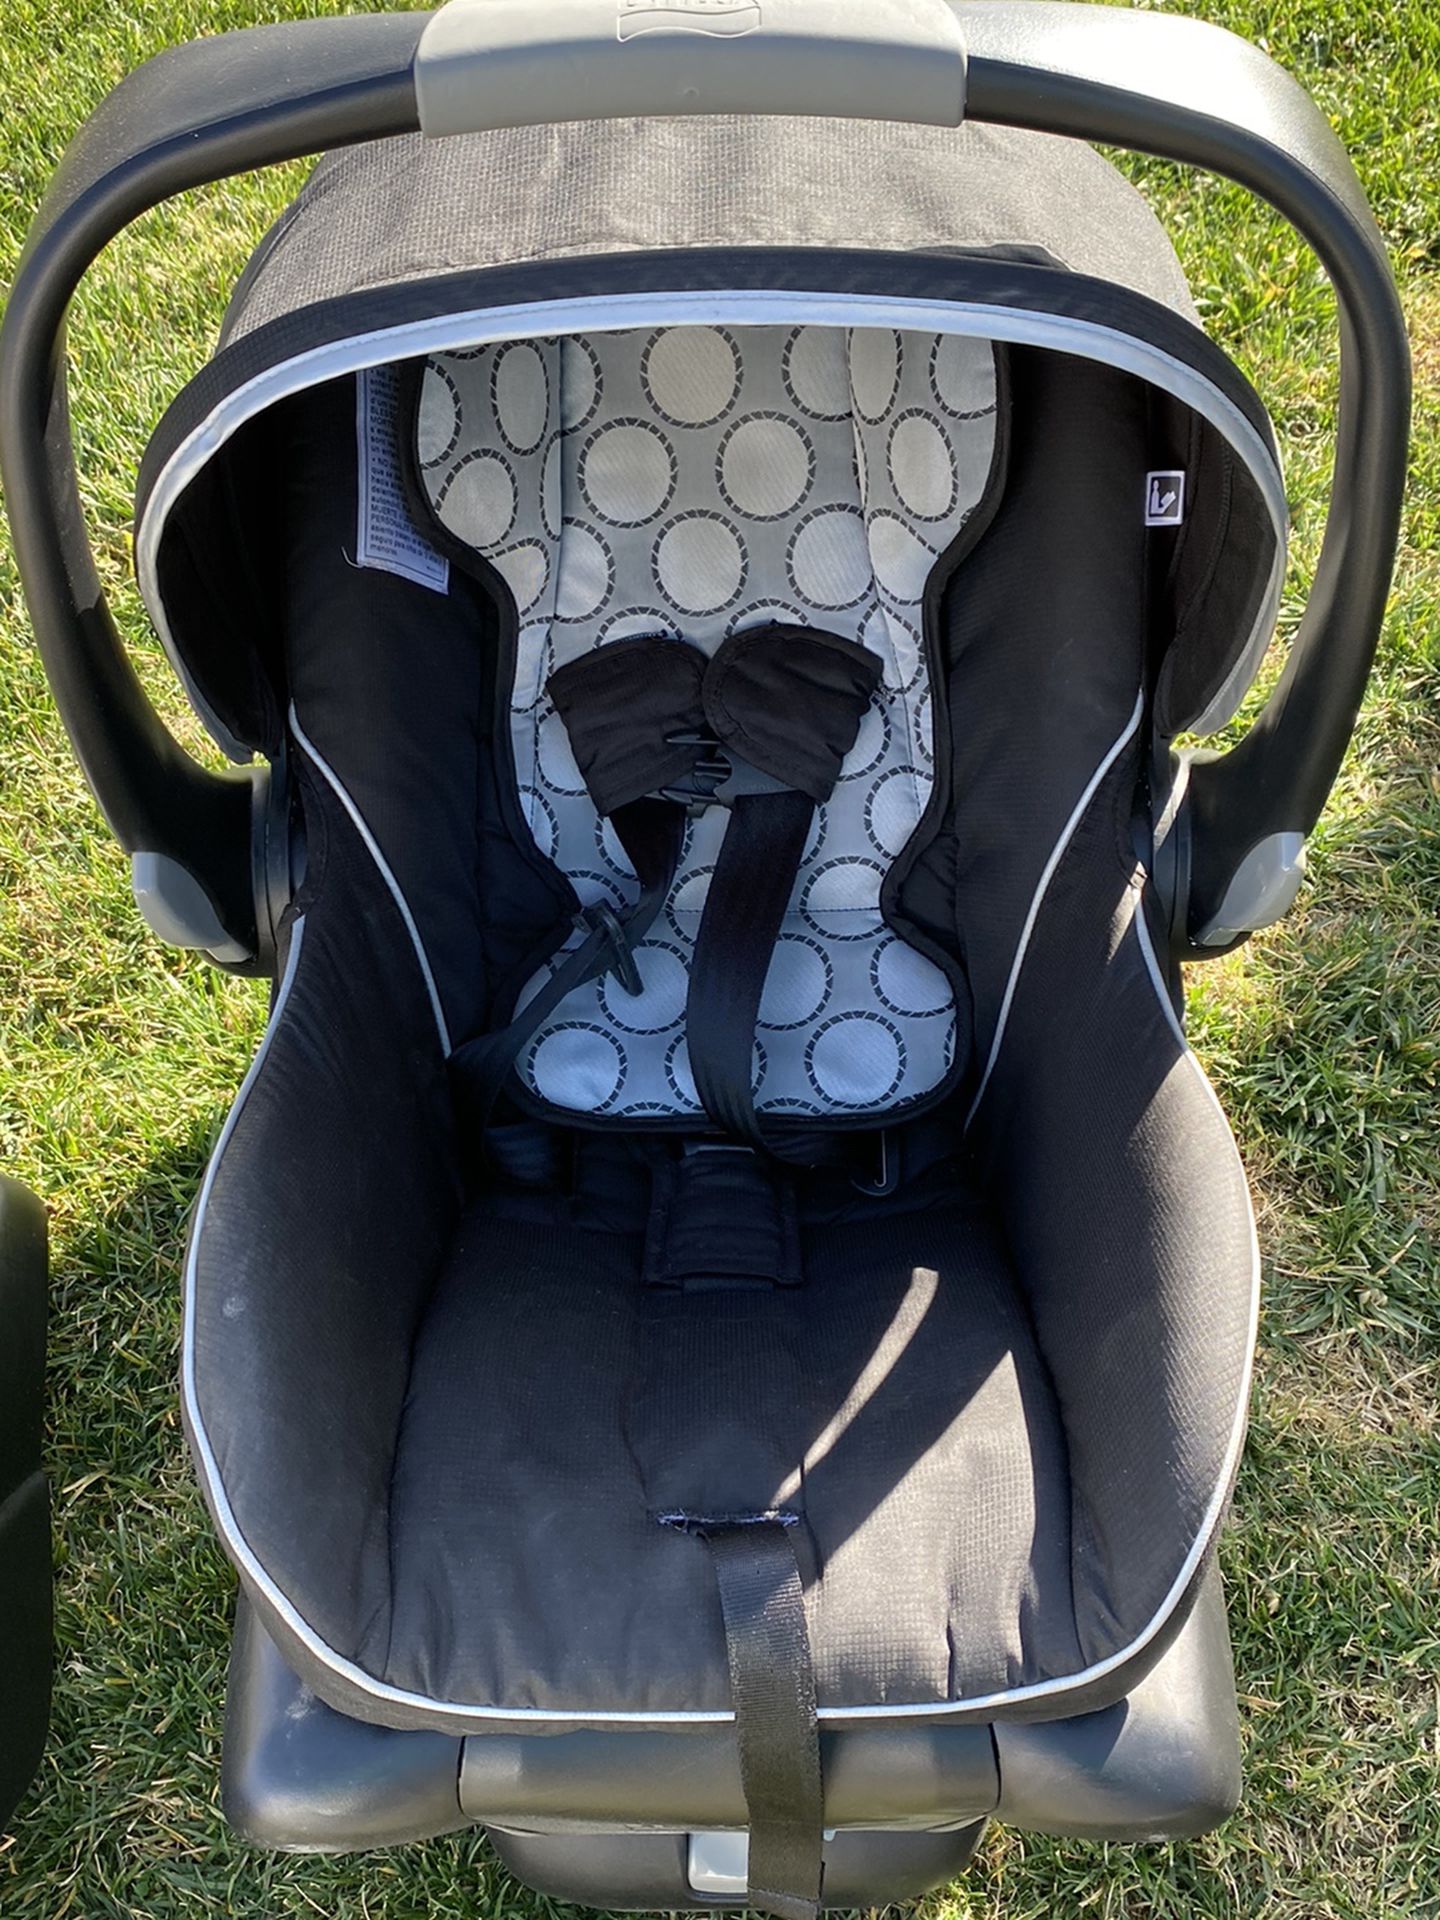 Britax Infant Car Seat And Base